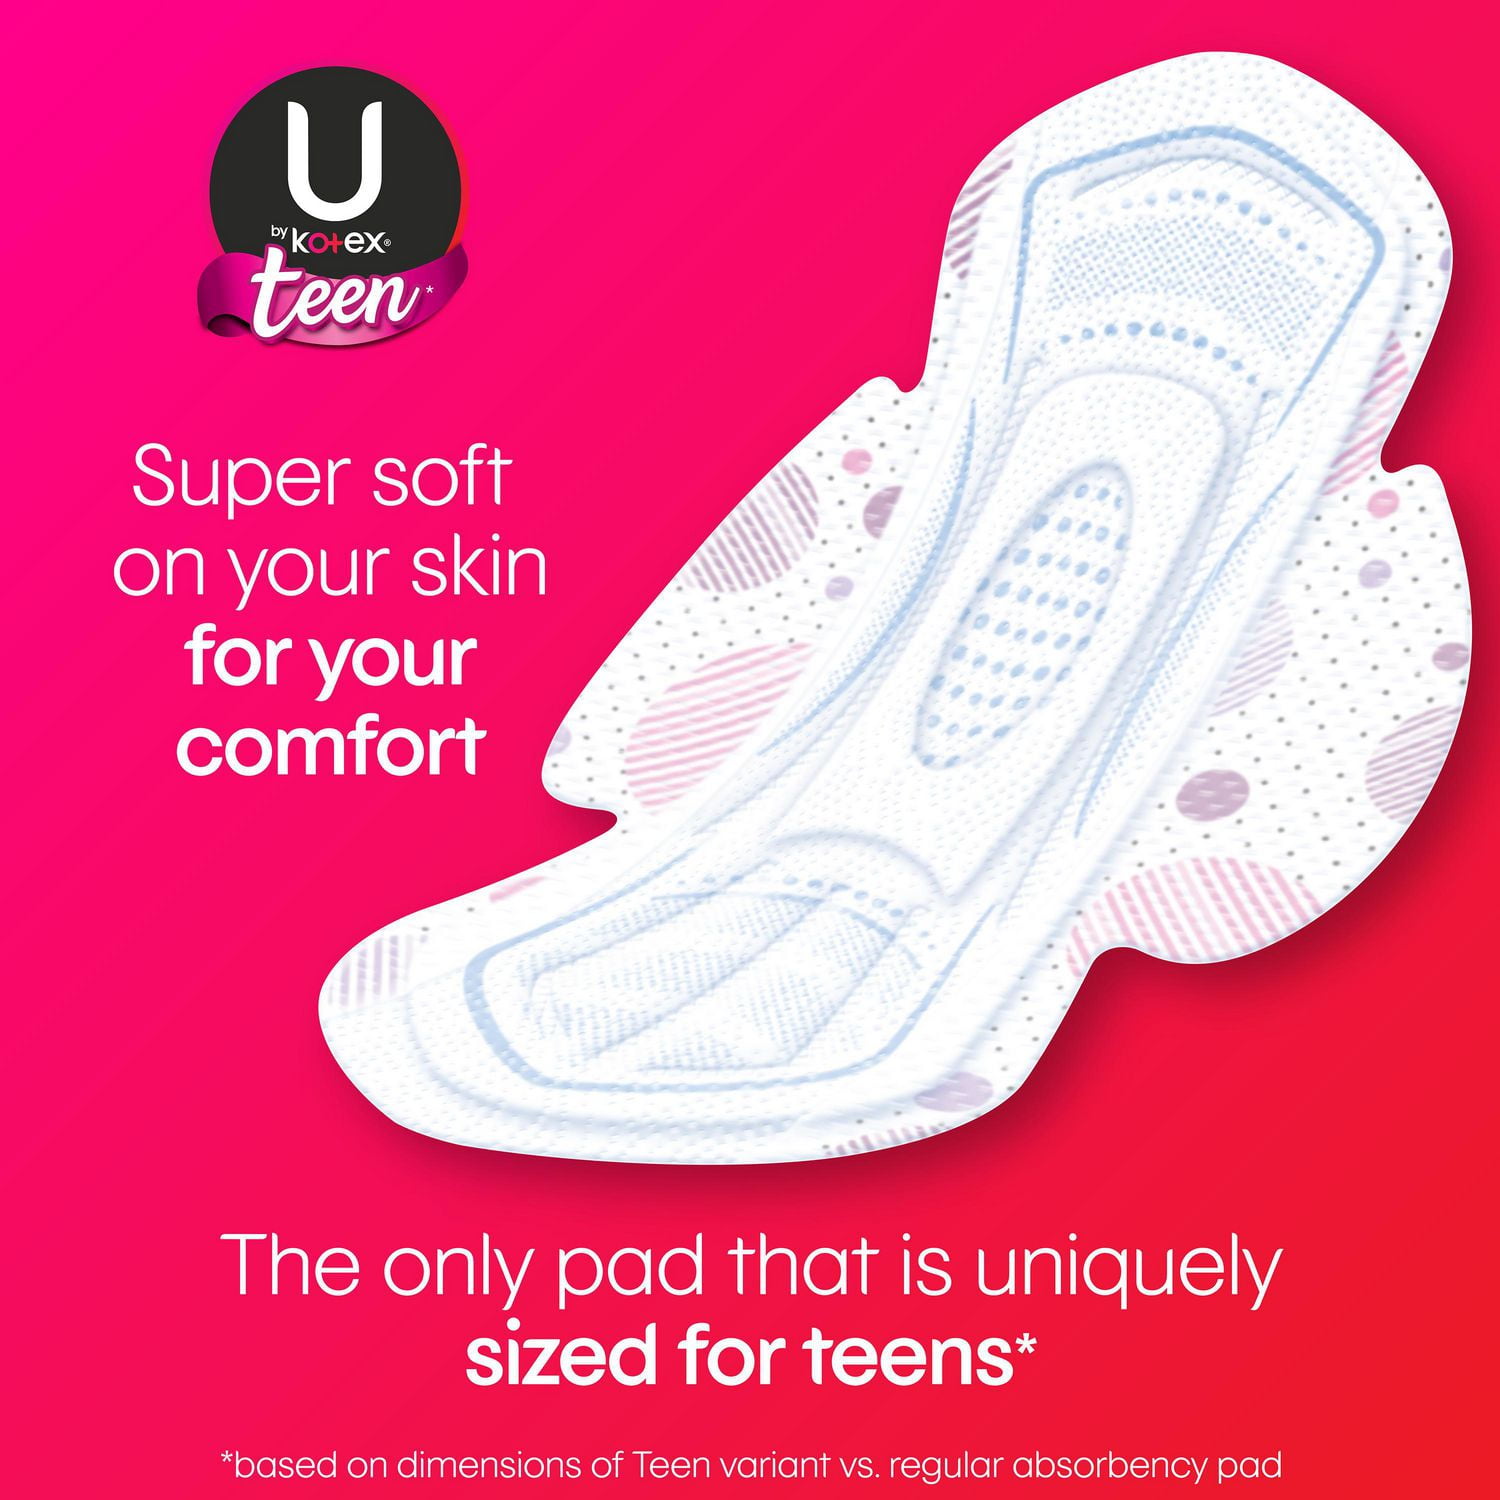 U by Kotex Teen Ultra Thin Pads with Wings Overnight